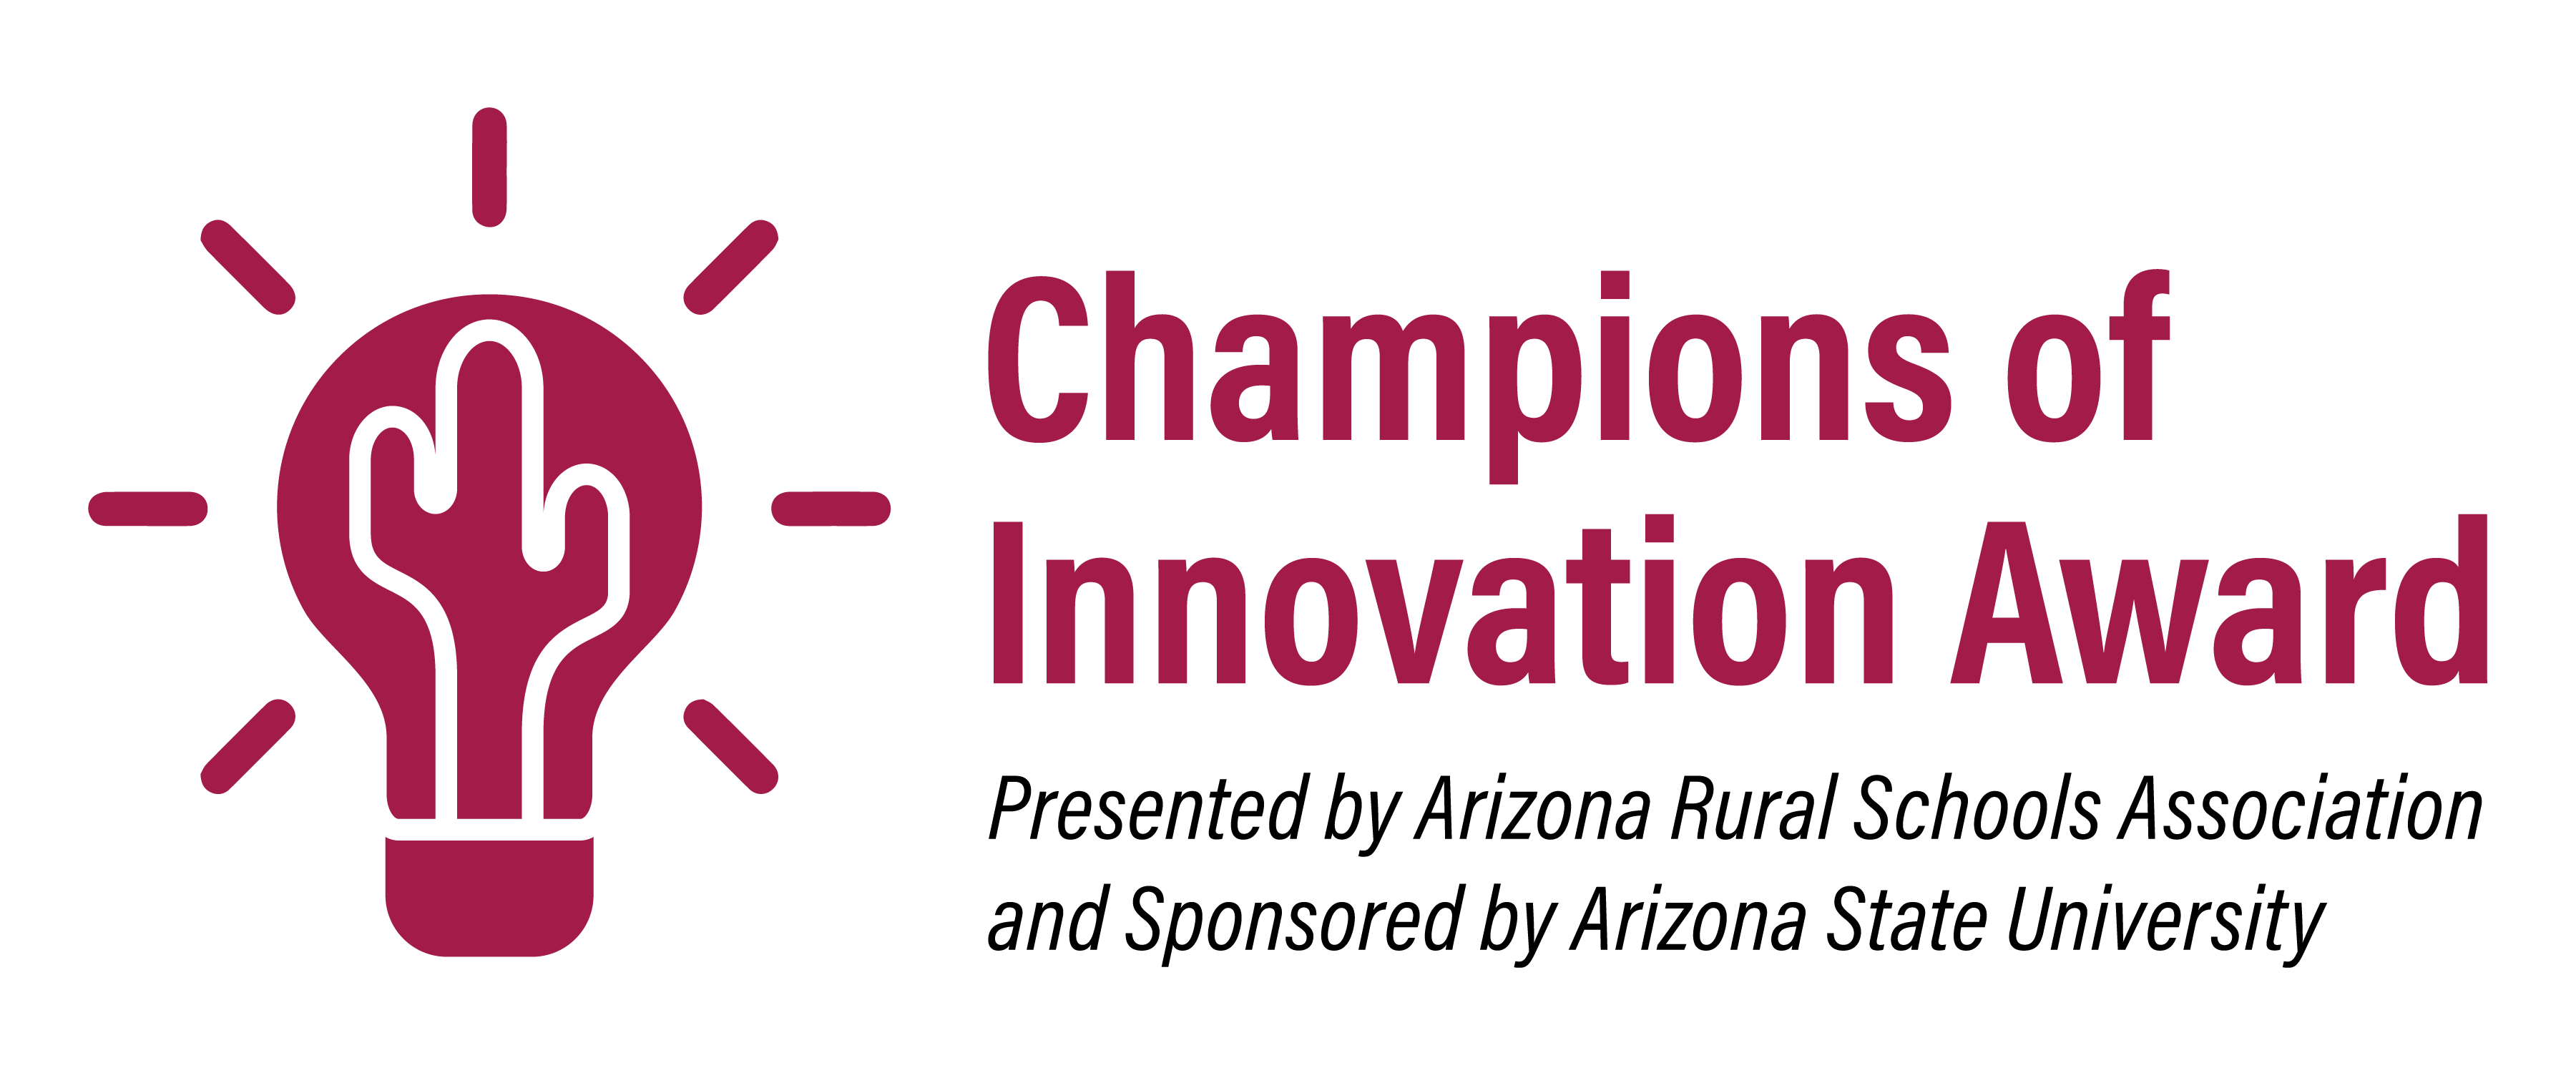 Champions of Innovation Award Presented by Arizona Rural Schools Association and Sponsored by Arizona State University